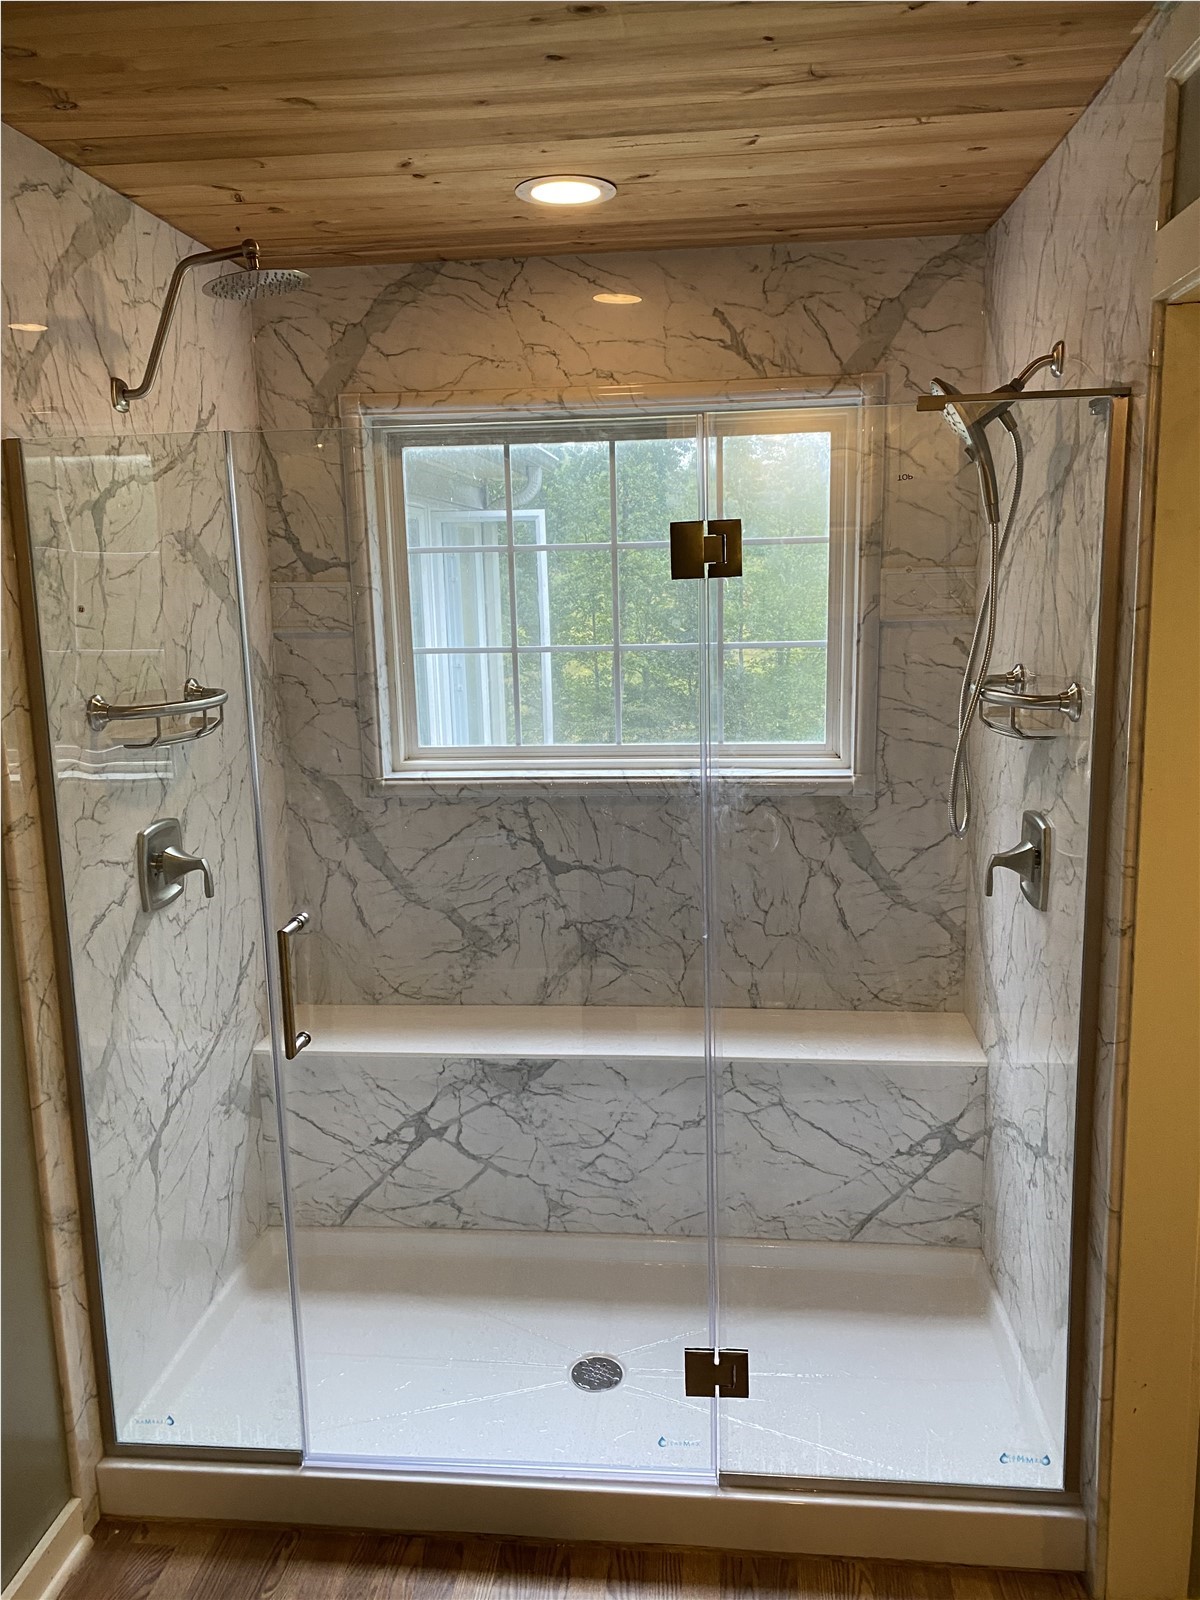 Upgrade Your Old Tub with a New Walk-In Shower